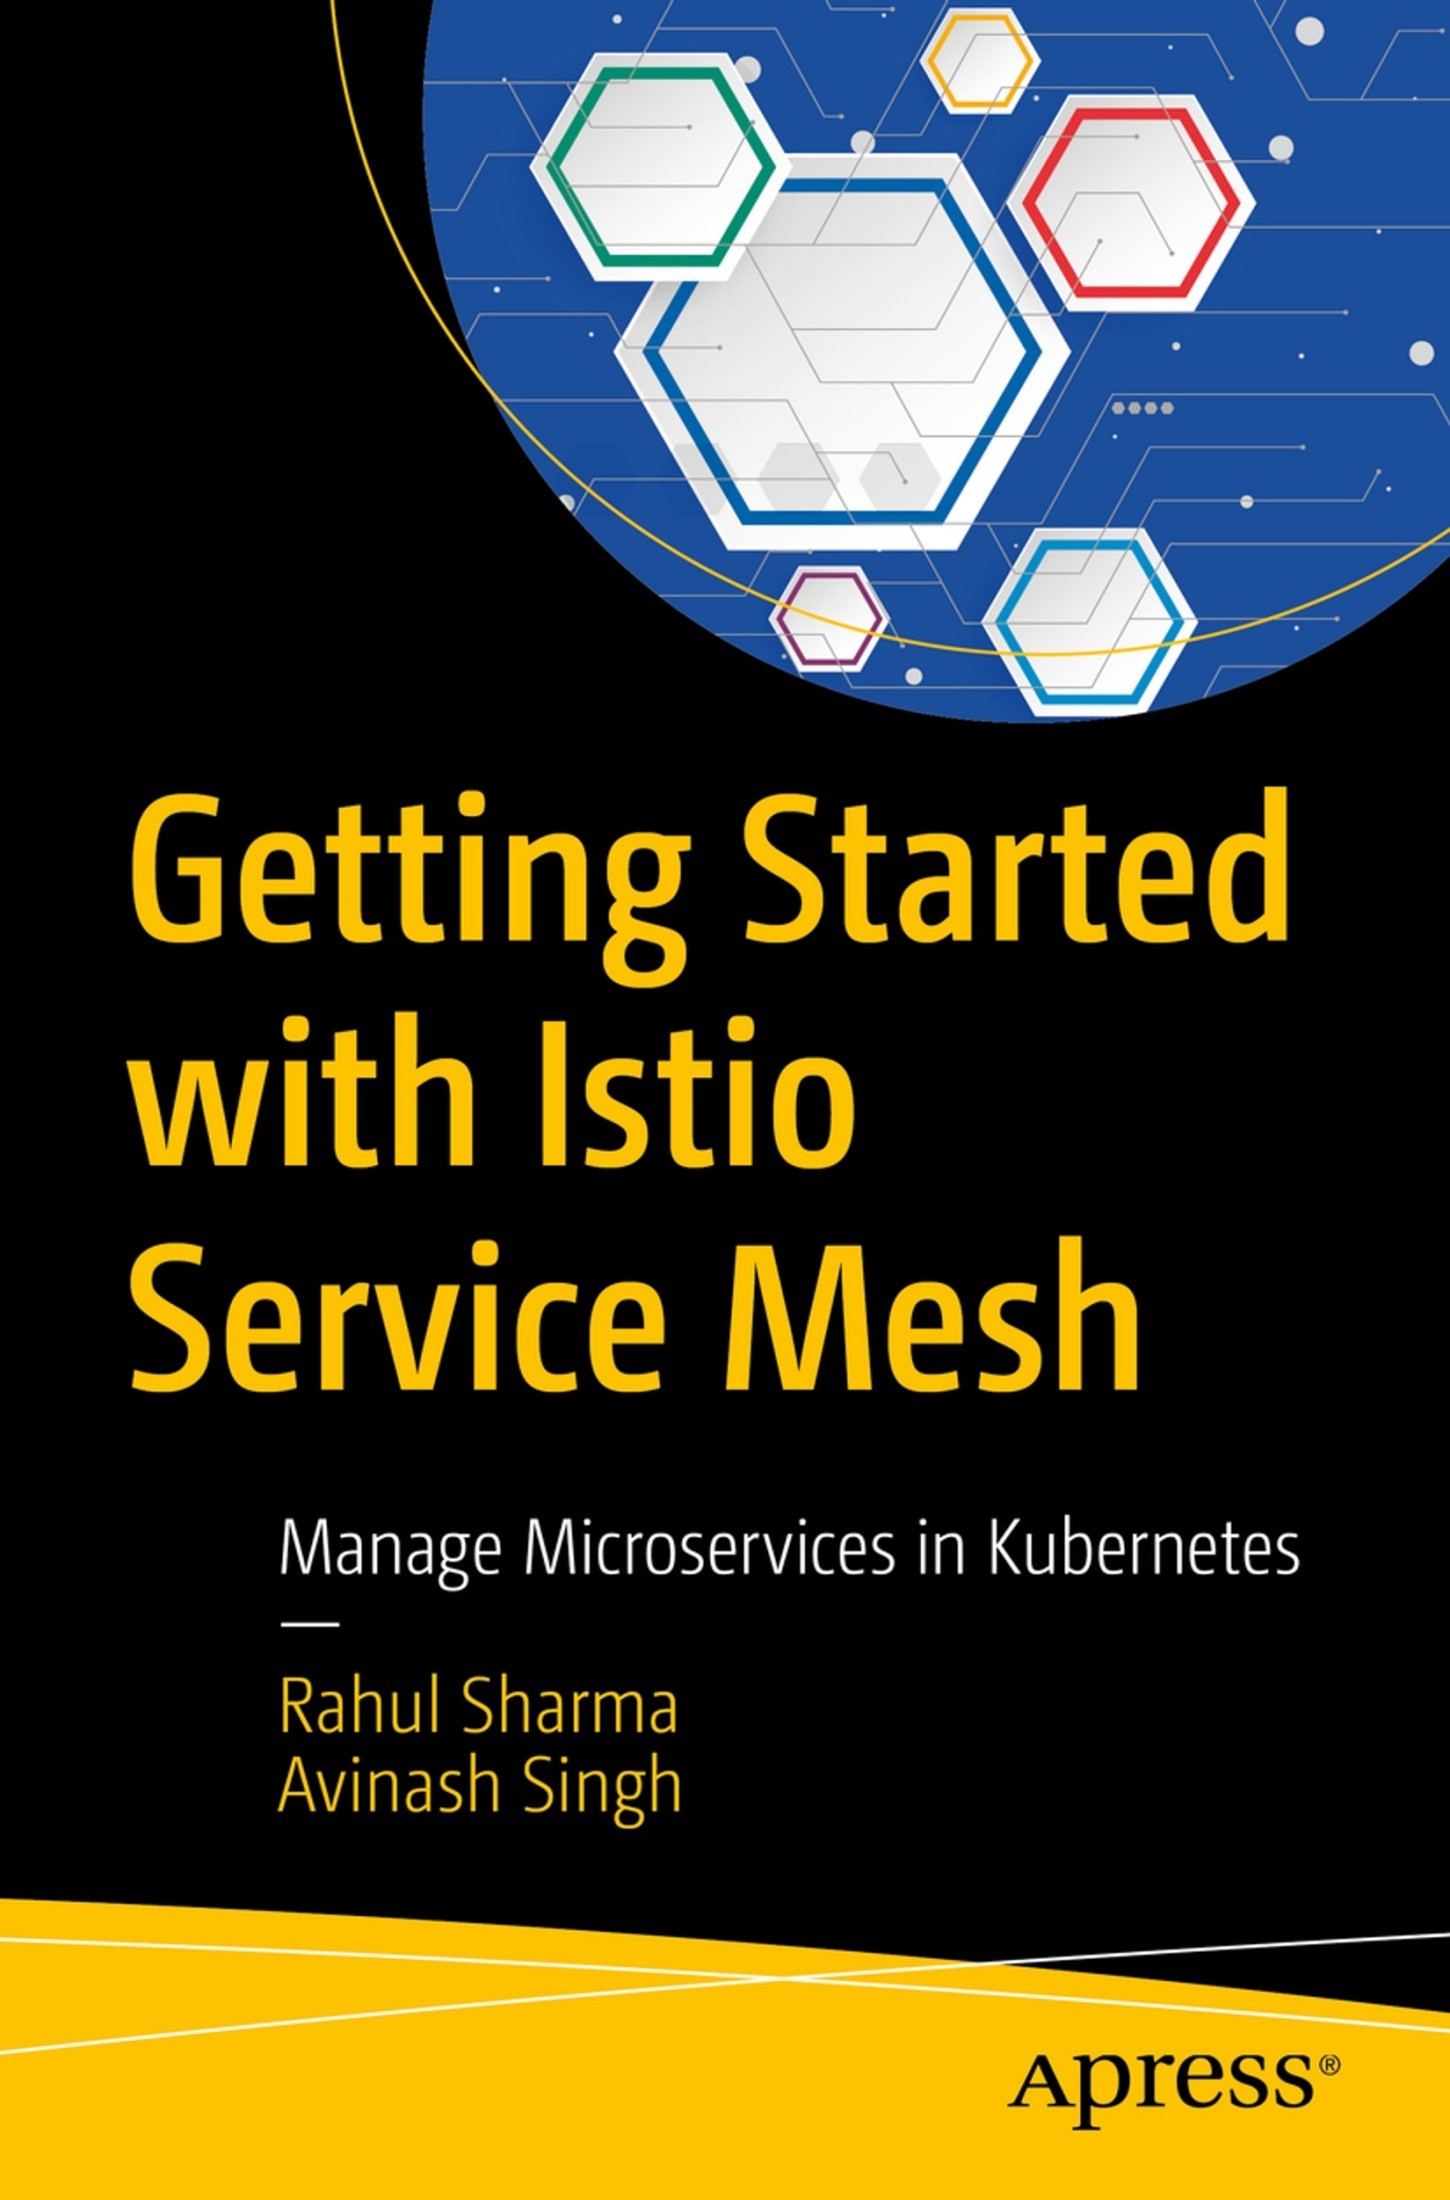 Getting Started With Istio Service Mesh